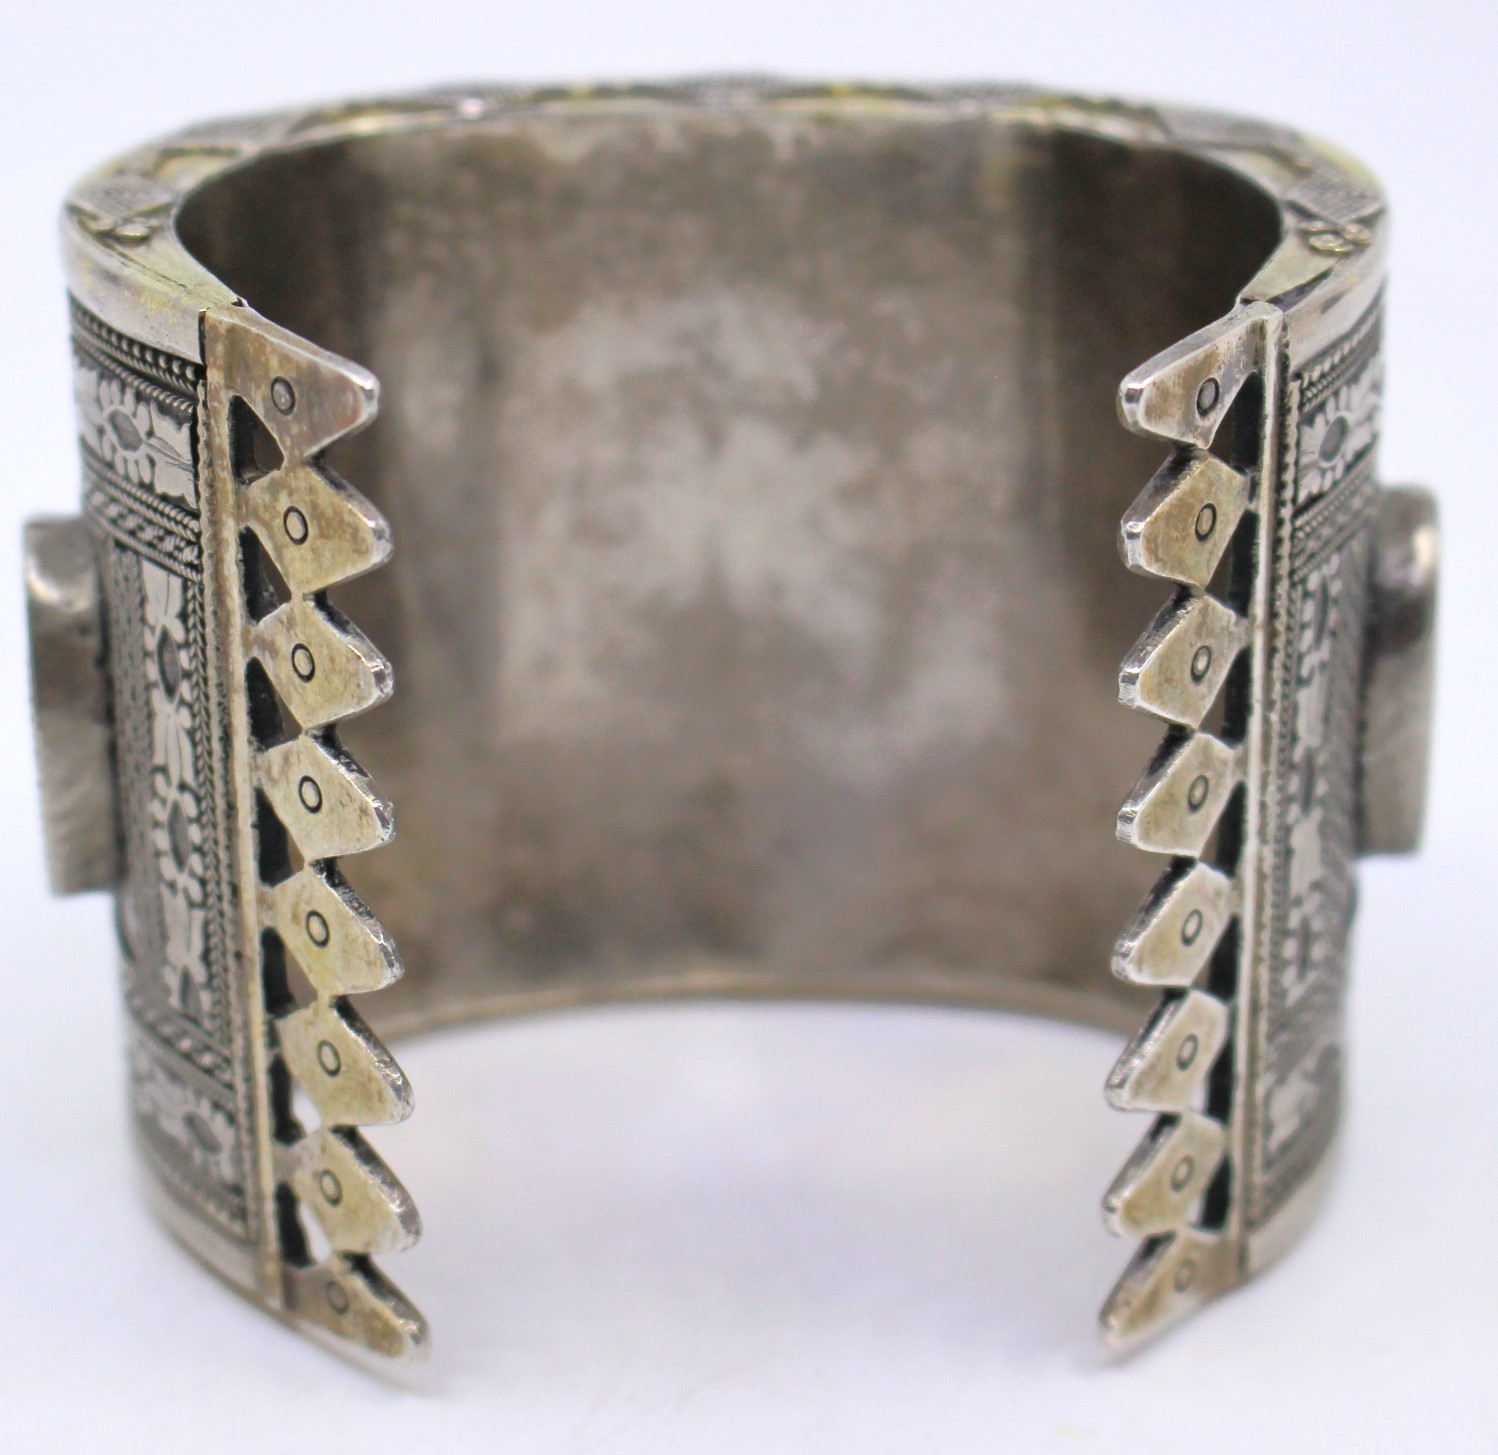 Late 19th Century Kazakh people Silk Road Unmarked White Metal and Parcel Gilt cuff bracelet set - Image 2 of 3